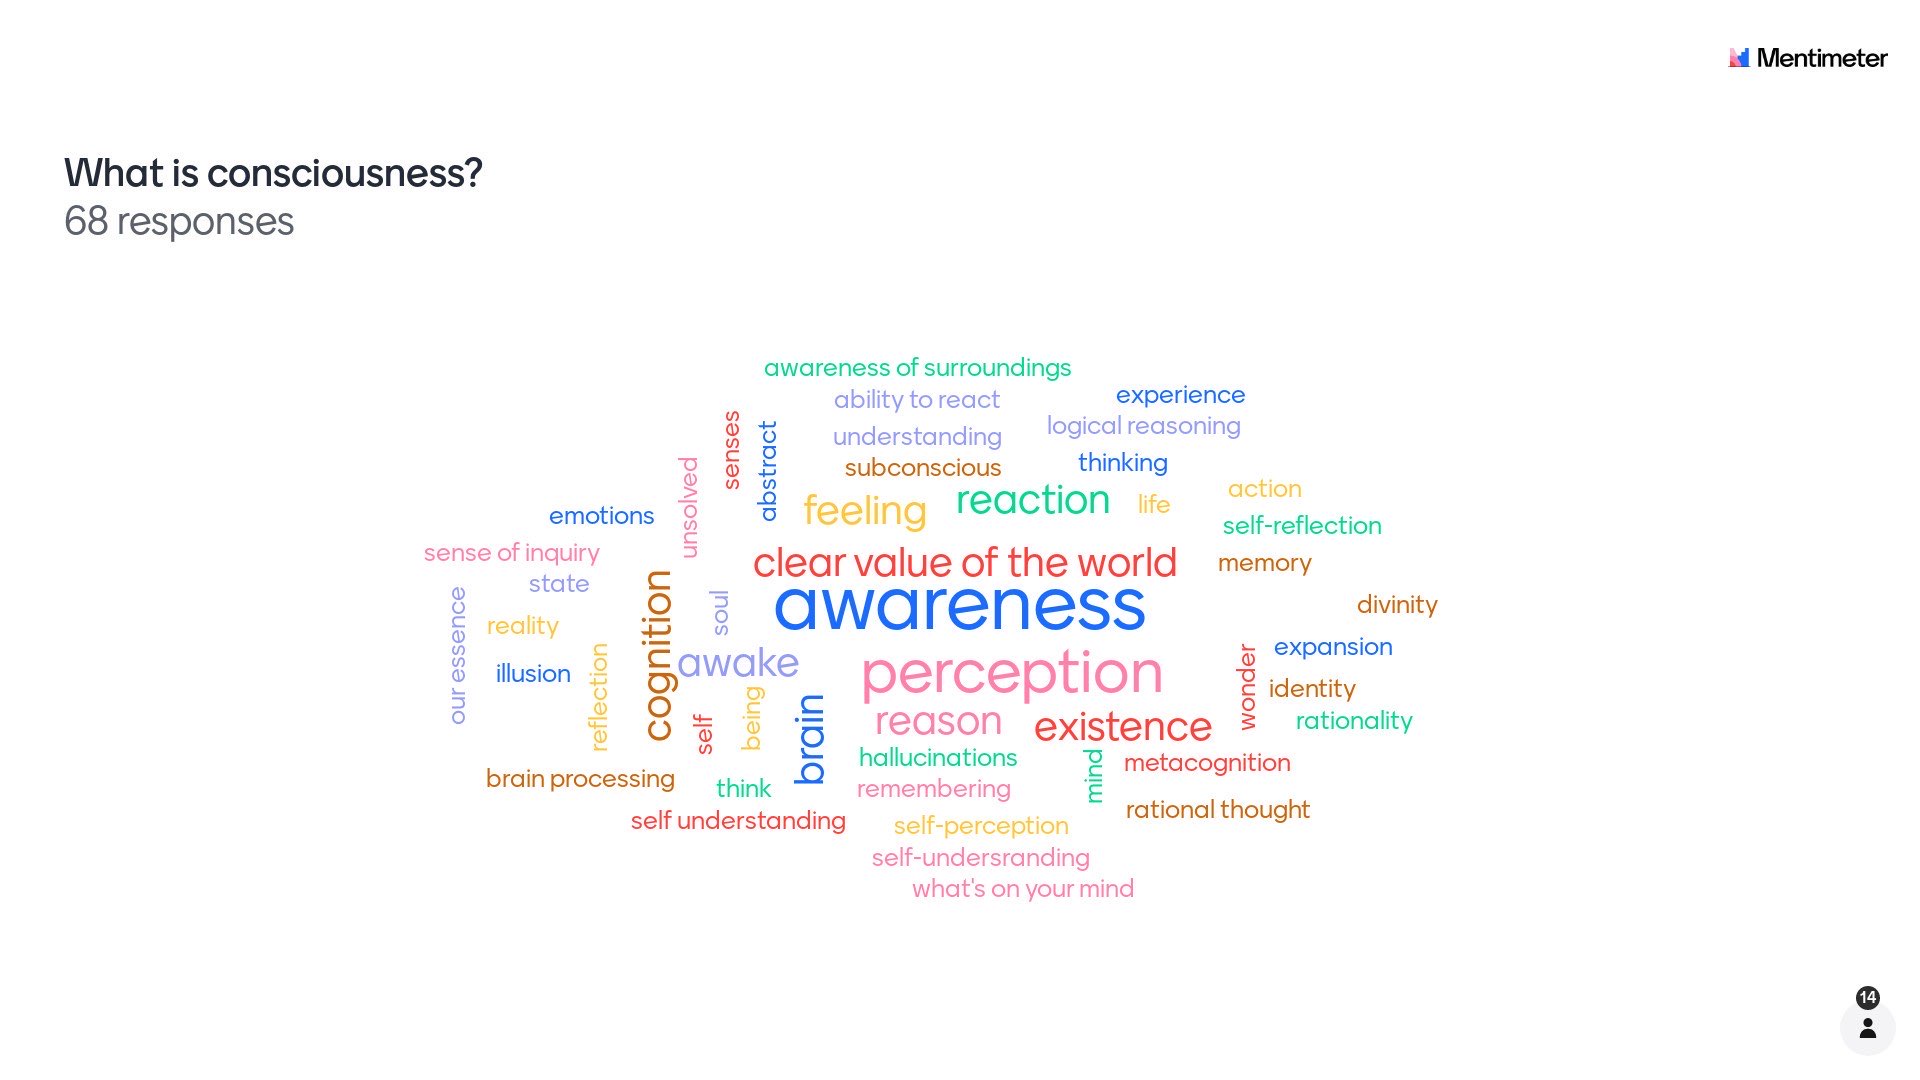 “What is consciousness?” word cloud